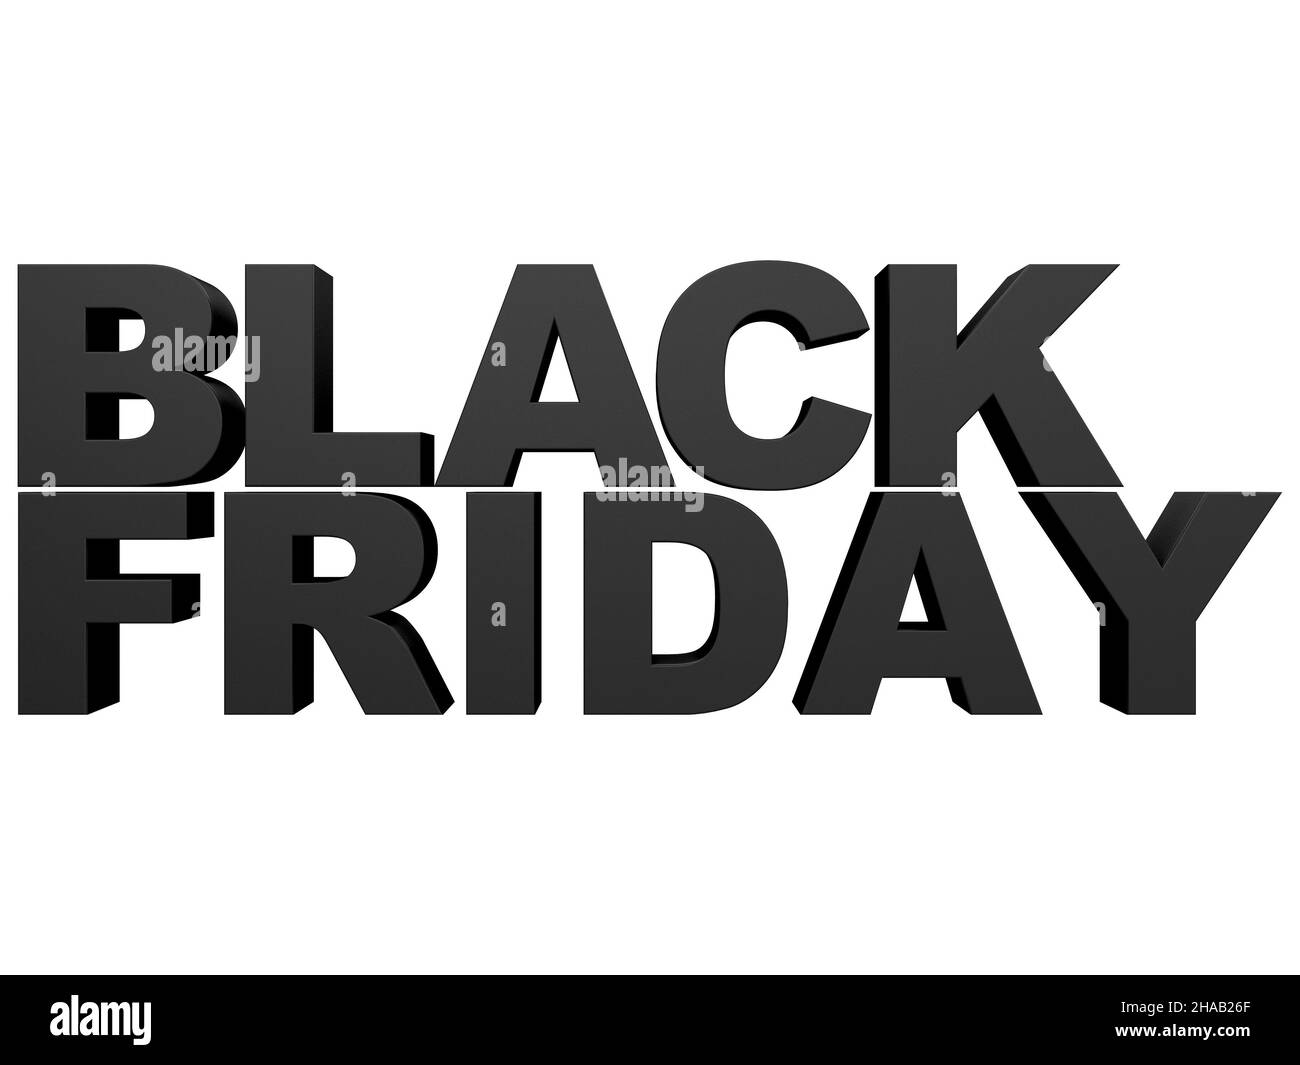 A 3D rendering of the text 'Black Friday' on white background Stock Photo